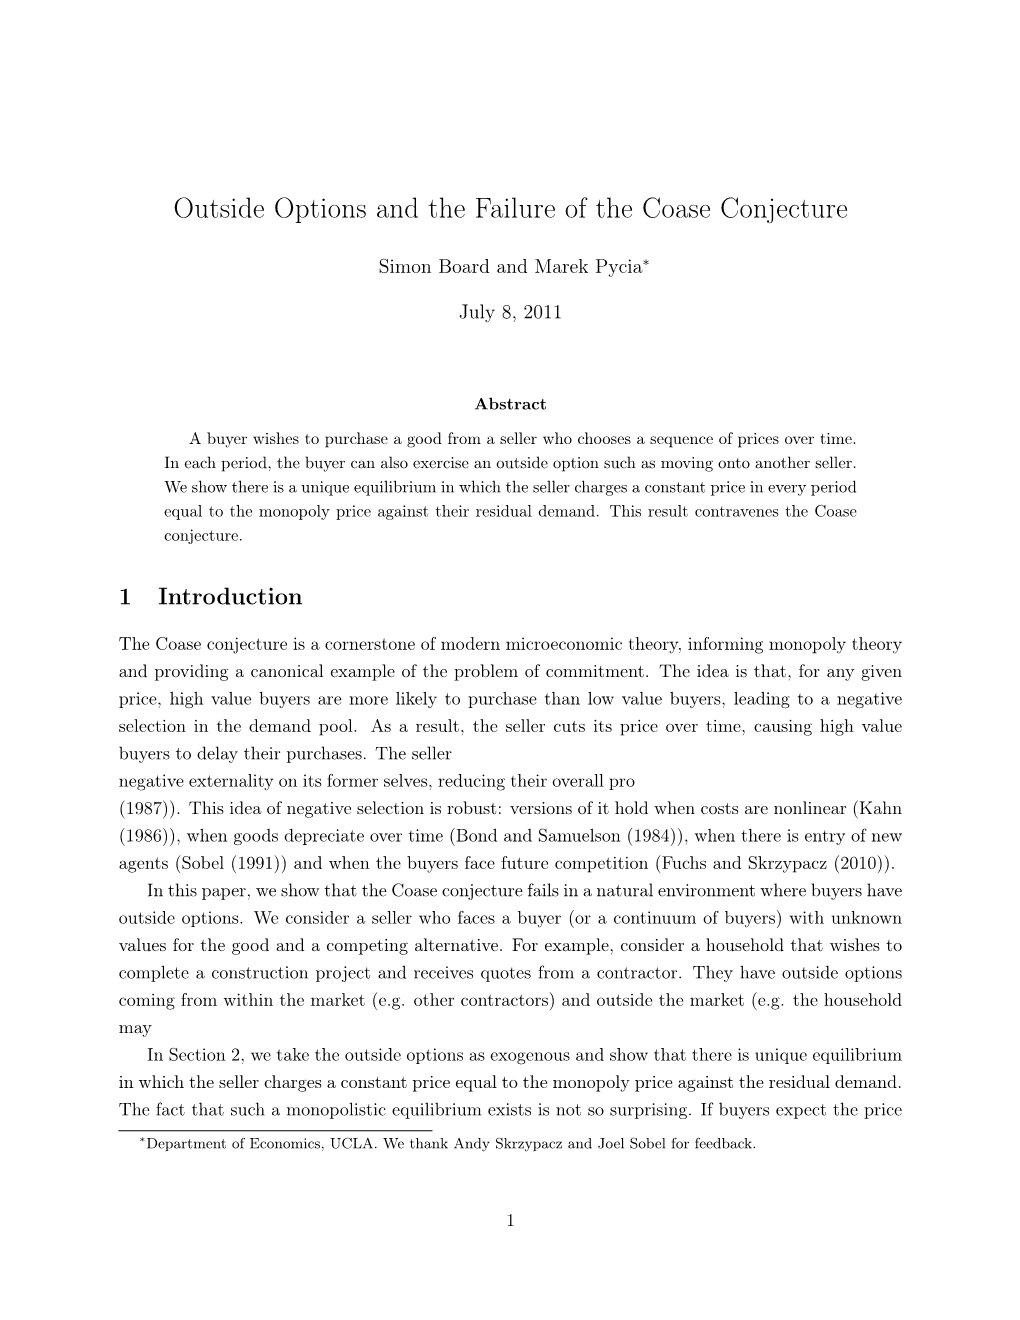 Outside Options and the Failure of the Coase Conjecture